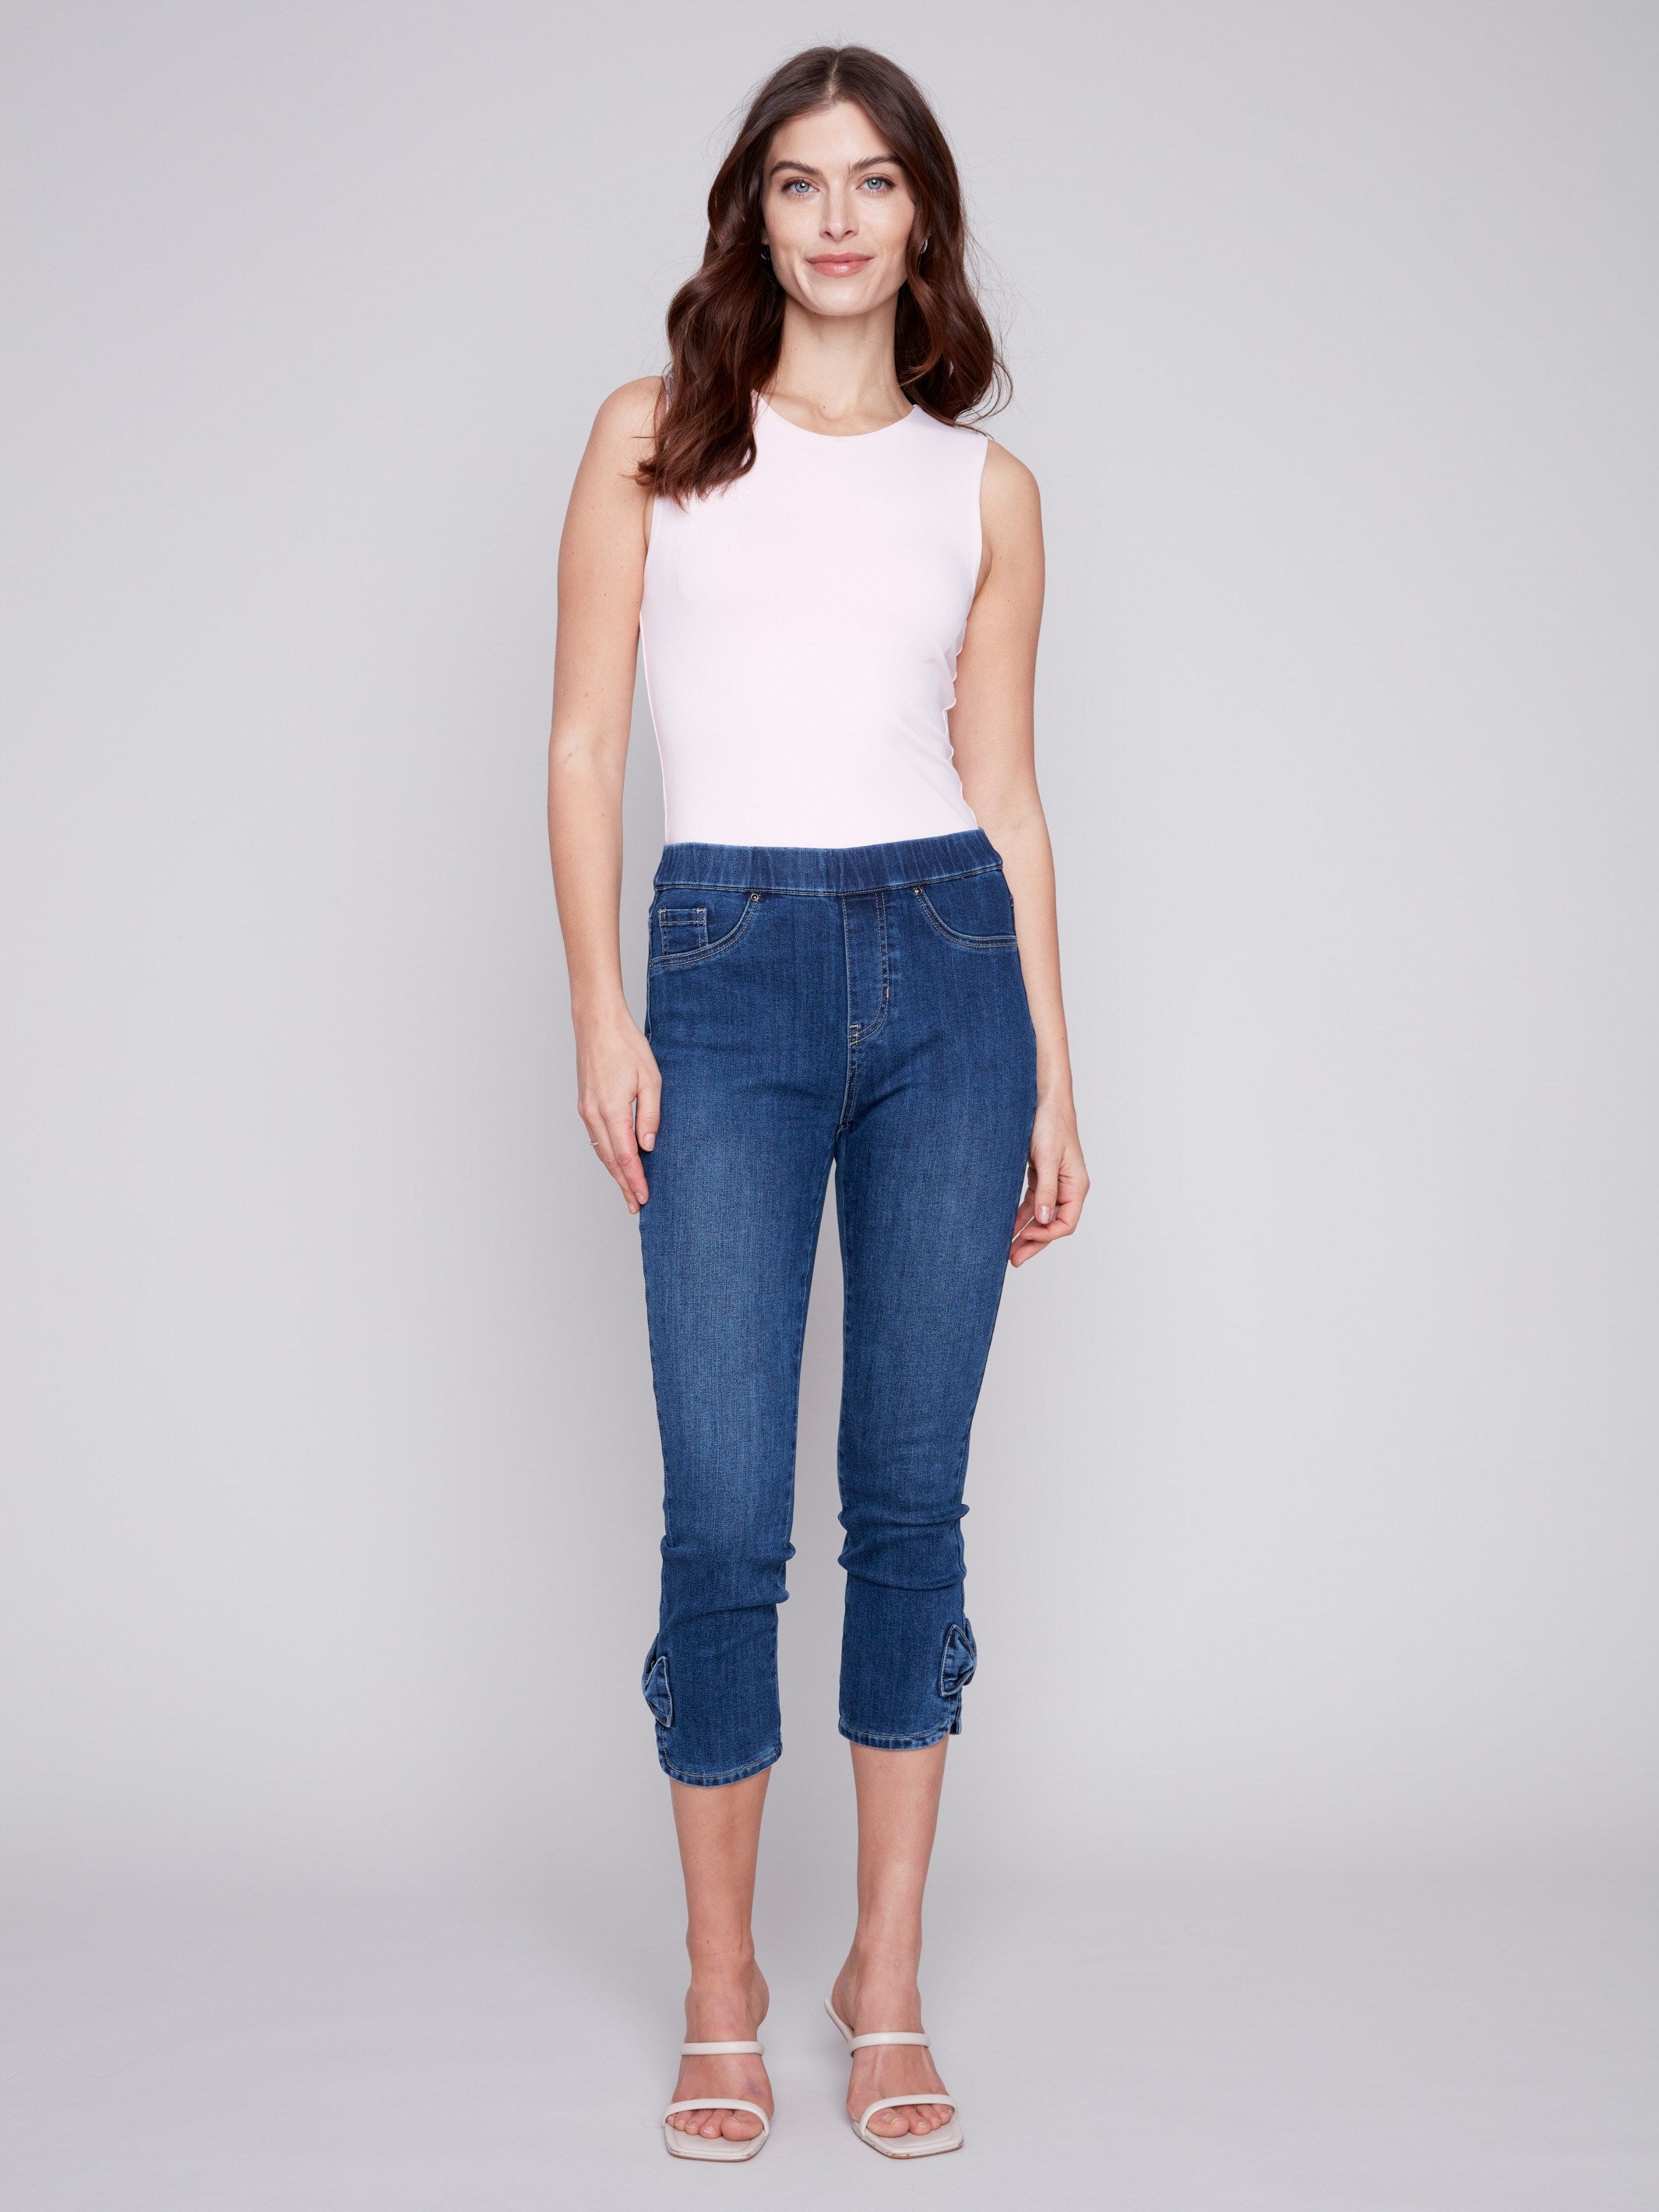 Charlie B Pull-On Jeans with Bow Detail - Indigo - Image 1